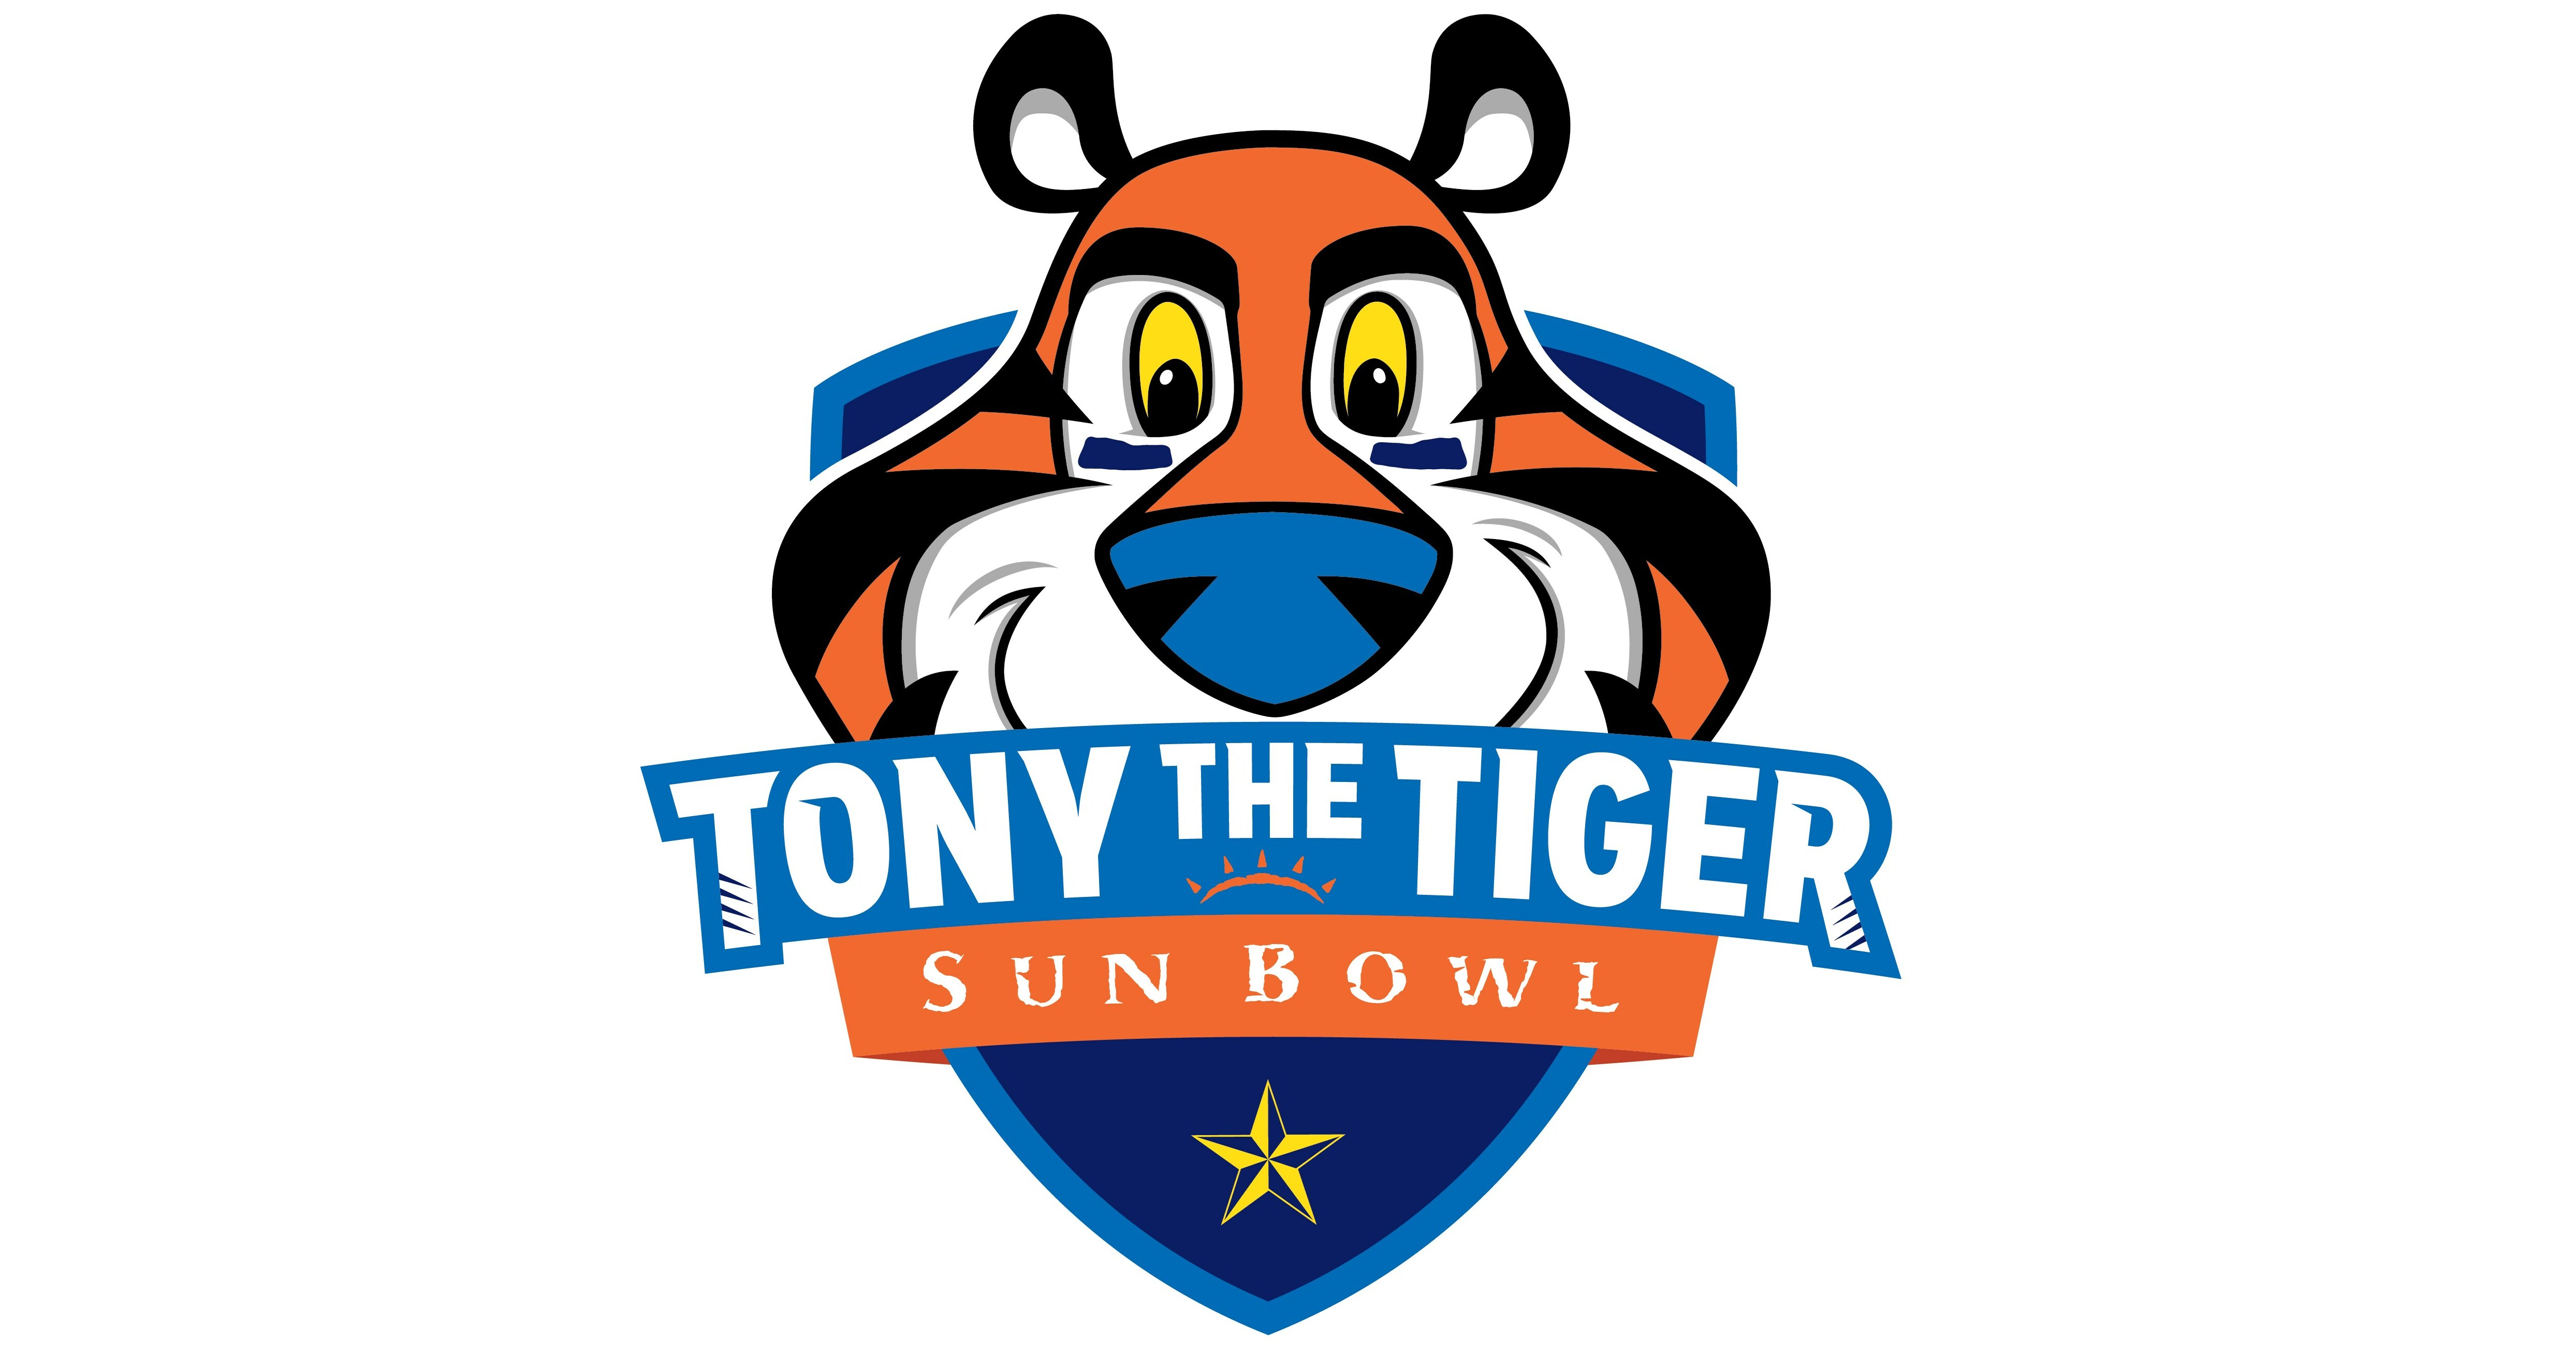 Kellogg's Frosted Flakes® and Albertsons Companies Foundation Unite to  Bring Mission Tiger™ to the 2023 Tony the Tiger® Sun Bowl